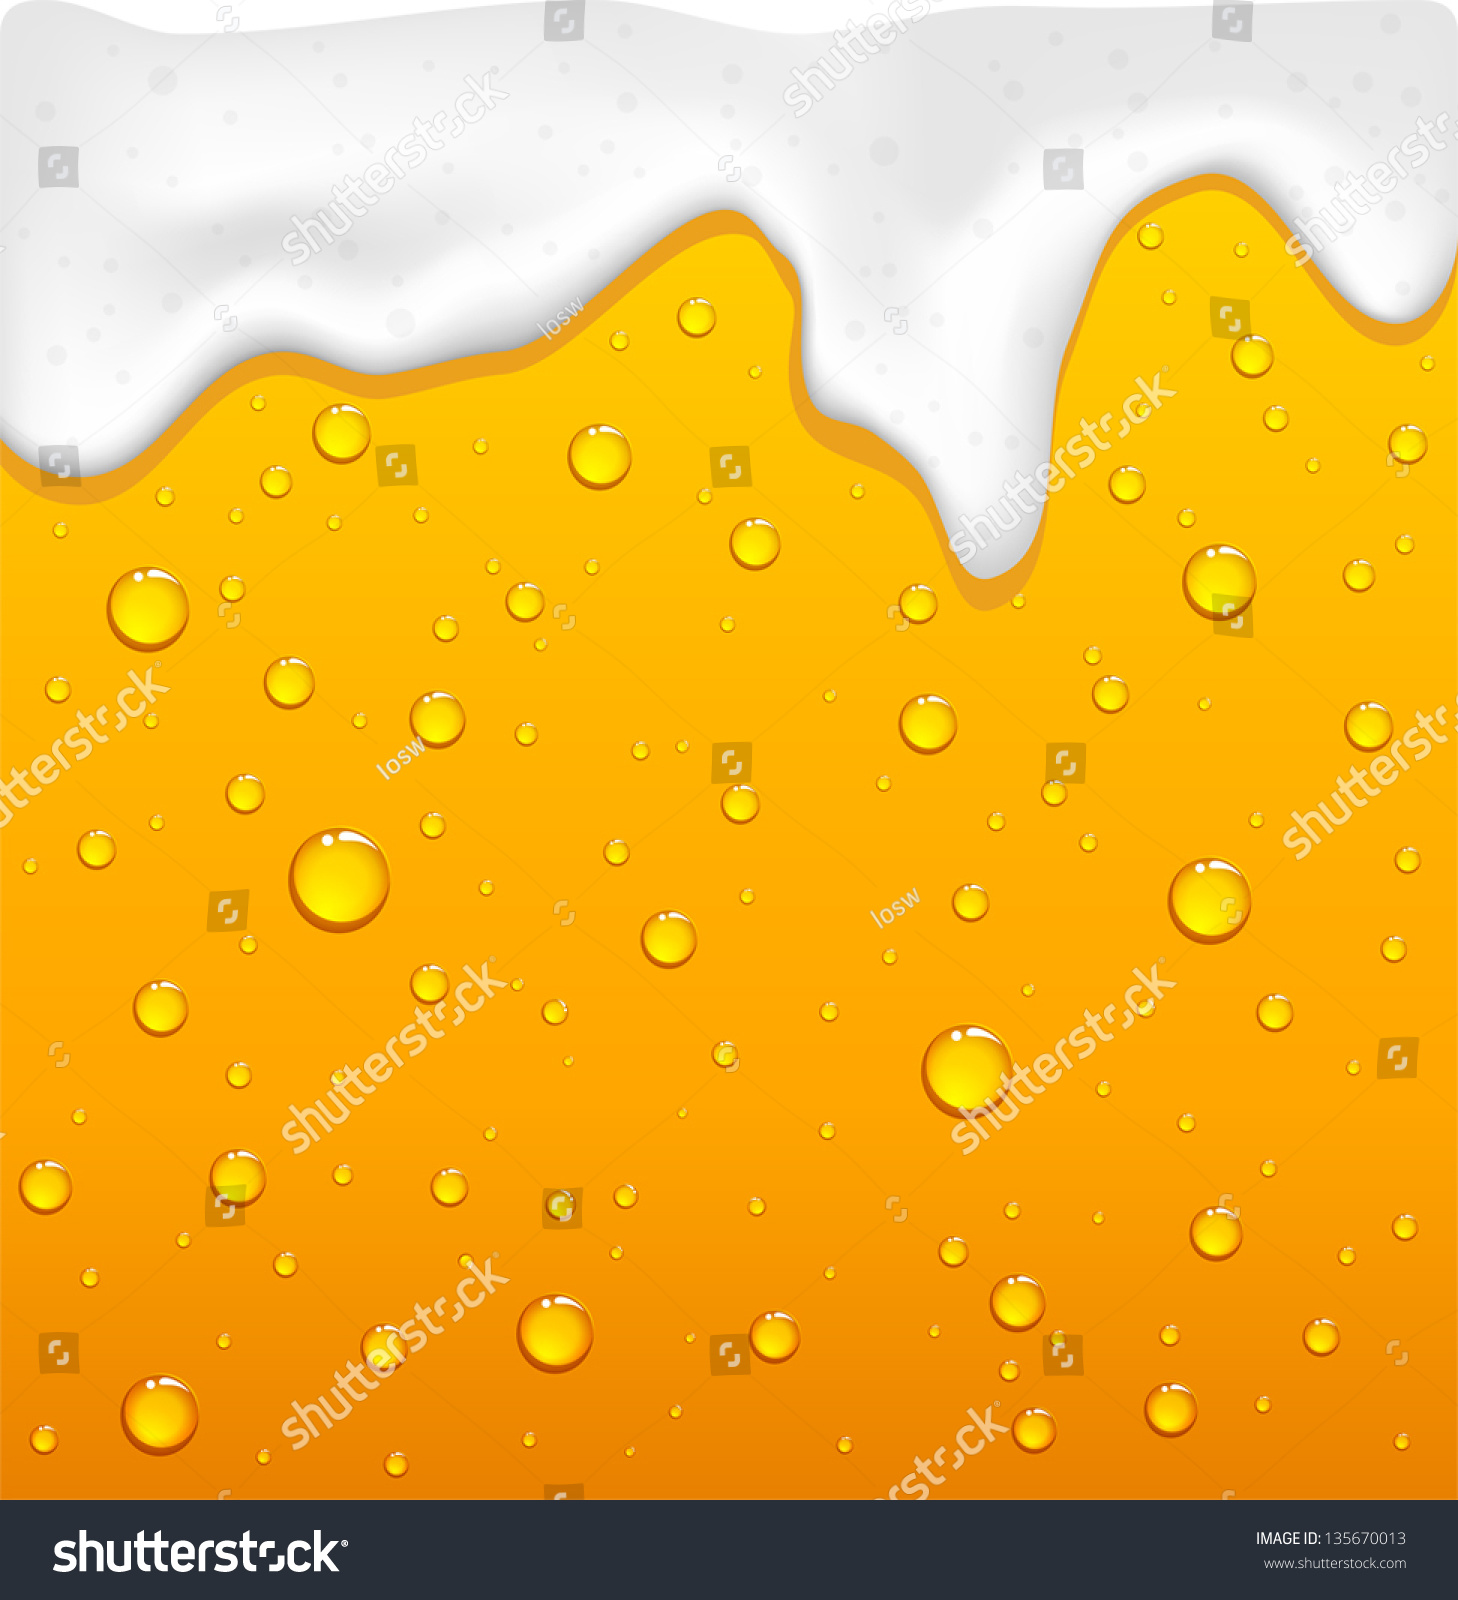 Download Drops Yellow Drink Foam Illustration Stock Vector Royalty Free 135670013 Yellowimages Mockups